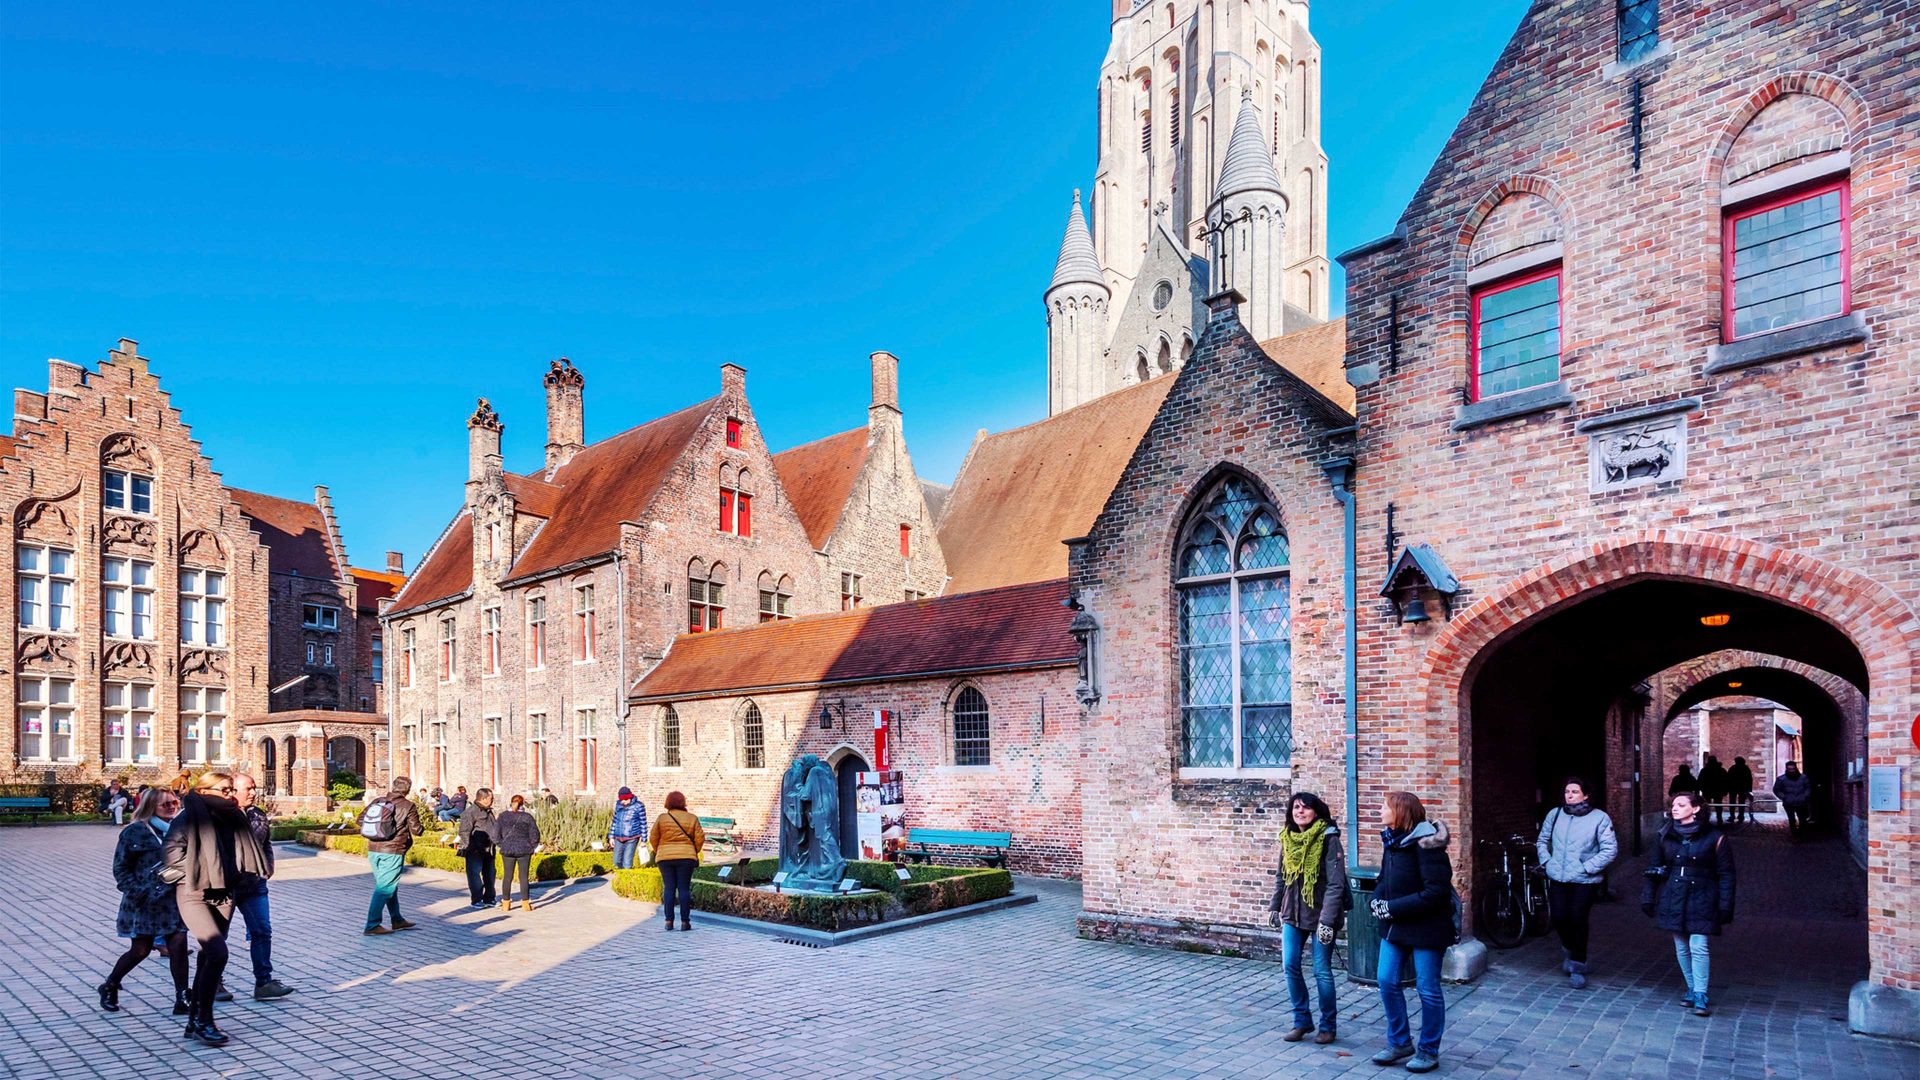 The Museum Sint-Janshospitaal in Bruges